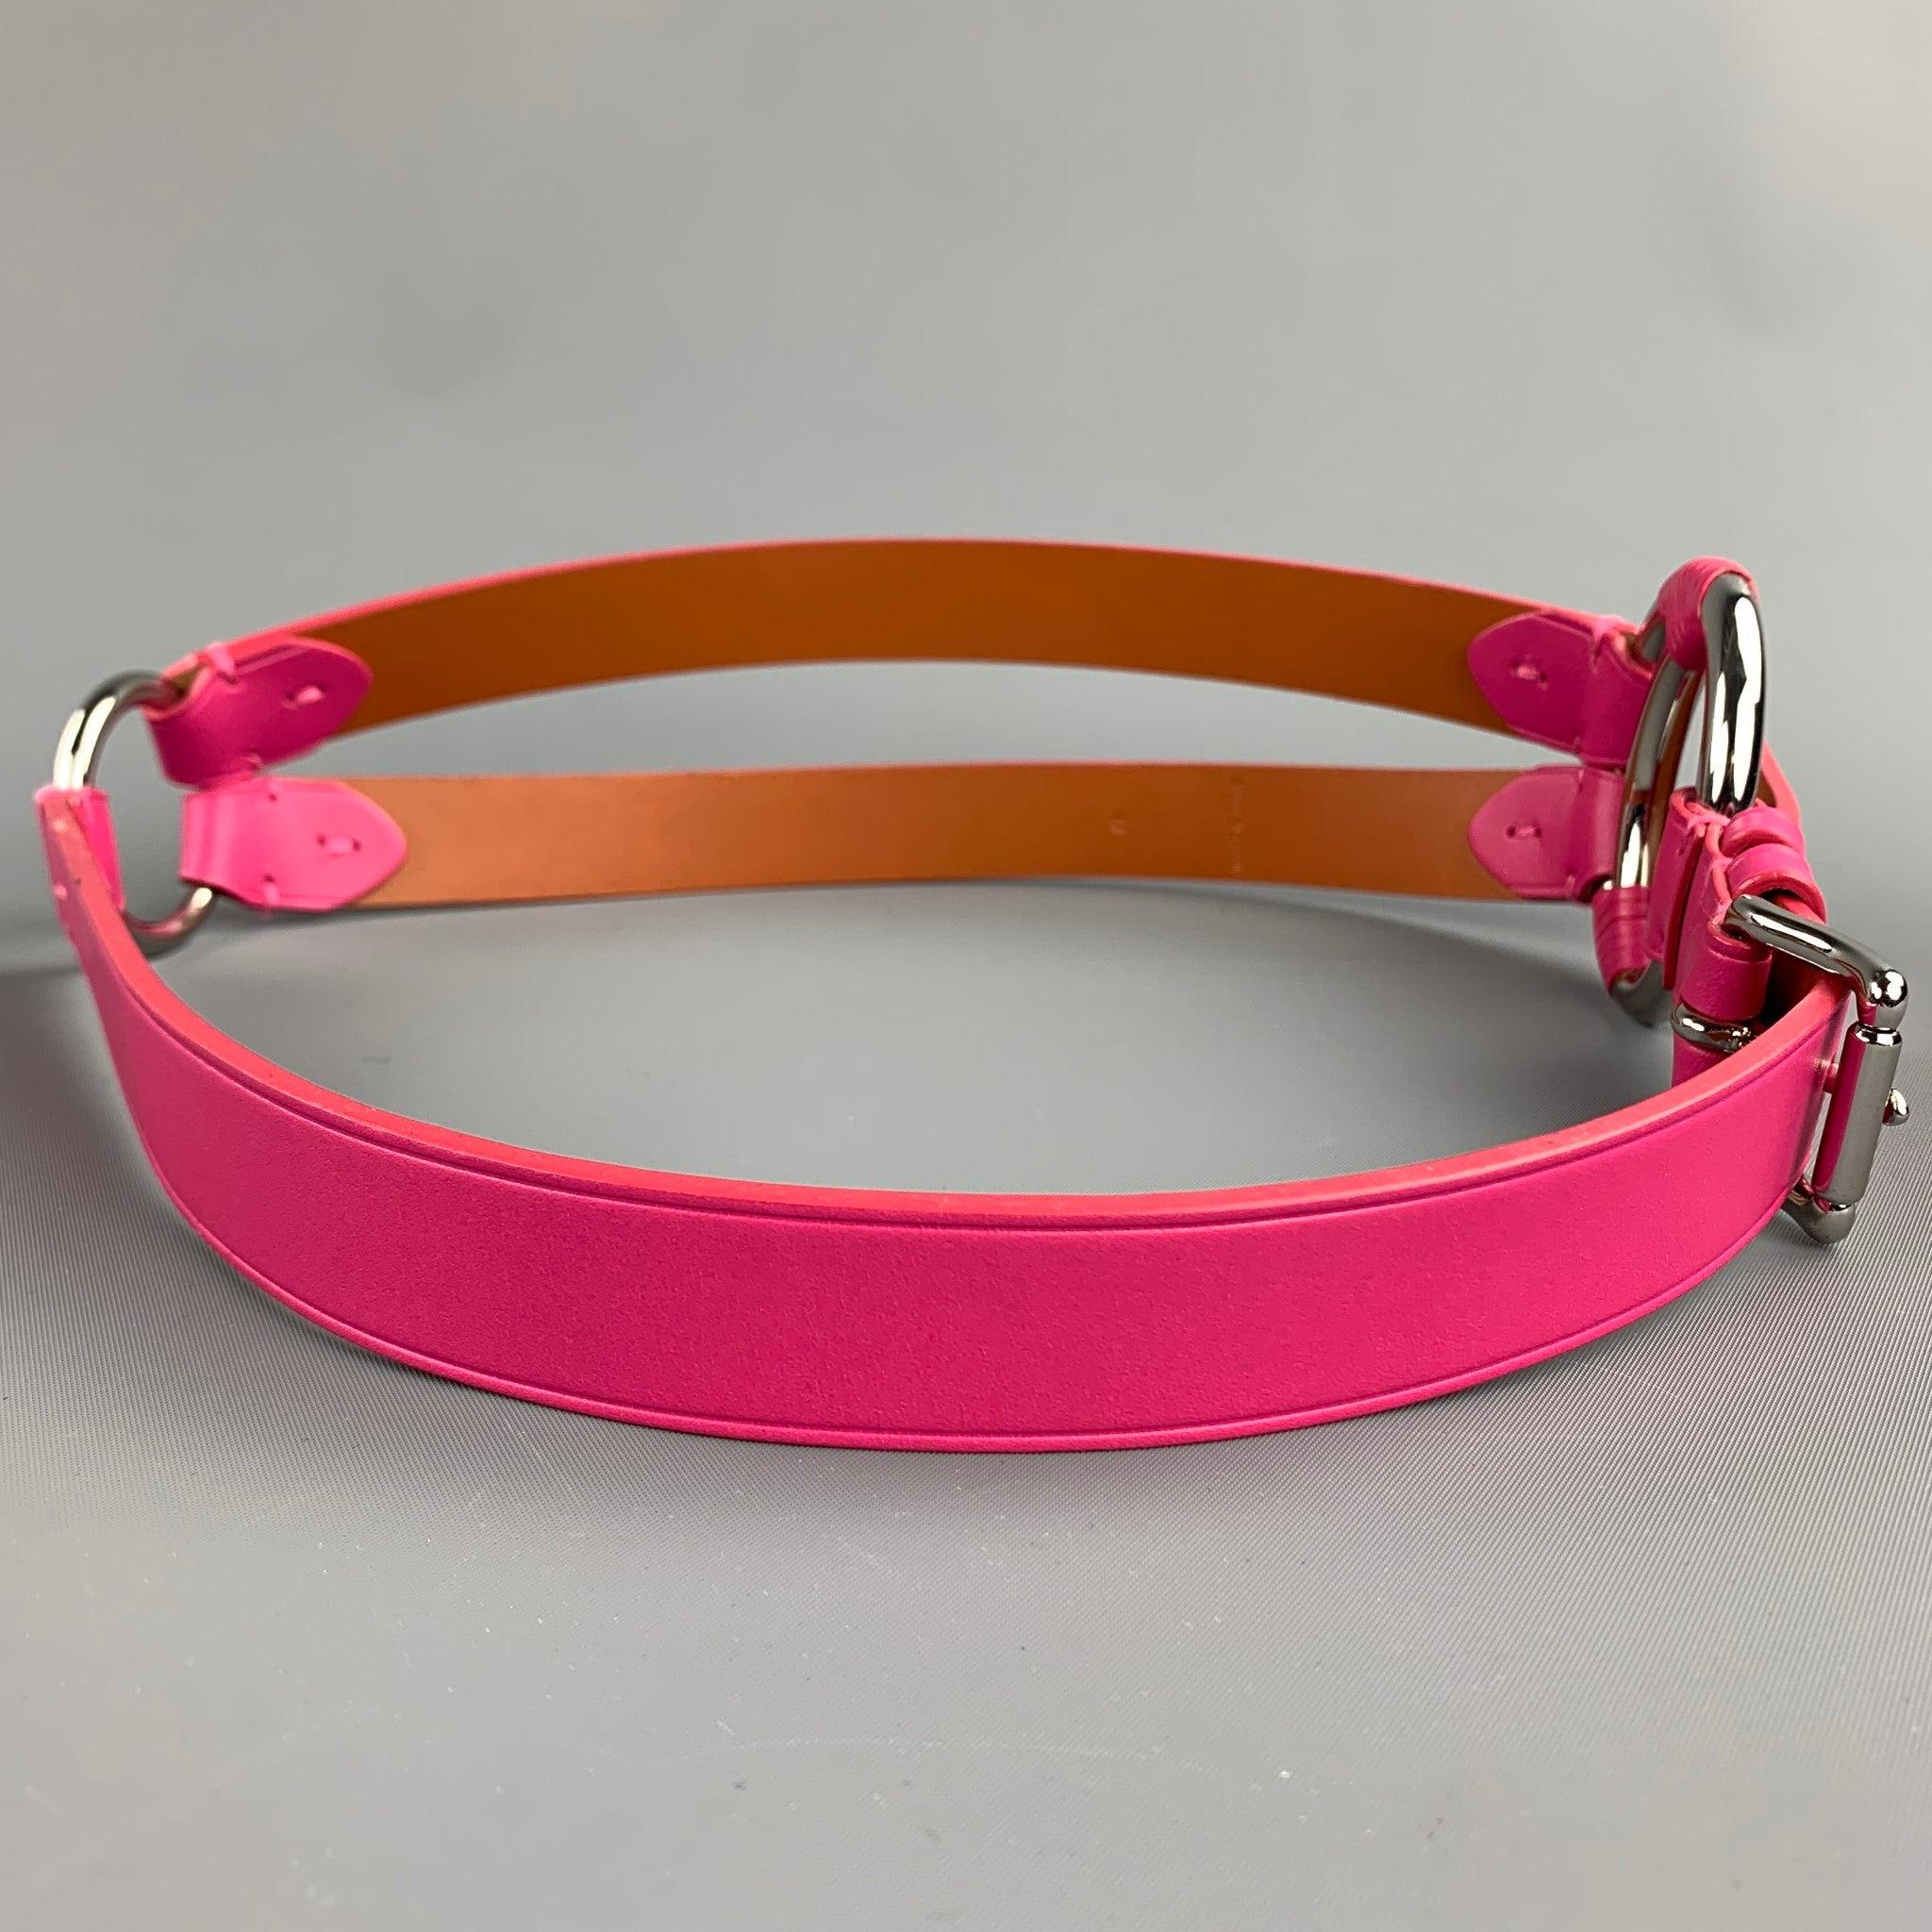 RALPH LAUREN belt comes in a pink leather with silver tone hardware and a buckle closure.
Very Good
Pre-Owned Condition. 

Marked:   MLength: 38 inches  Width: 1 inches  Fits: 32 inches  - 34 inches  
  
  
 
Reference: 106676
Category: Belt
More